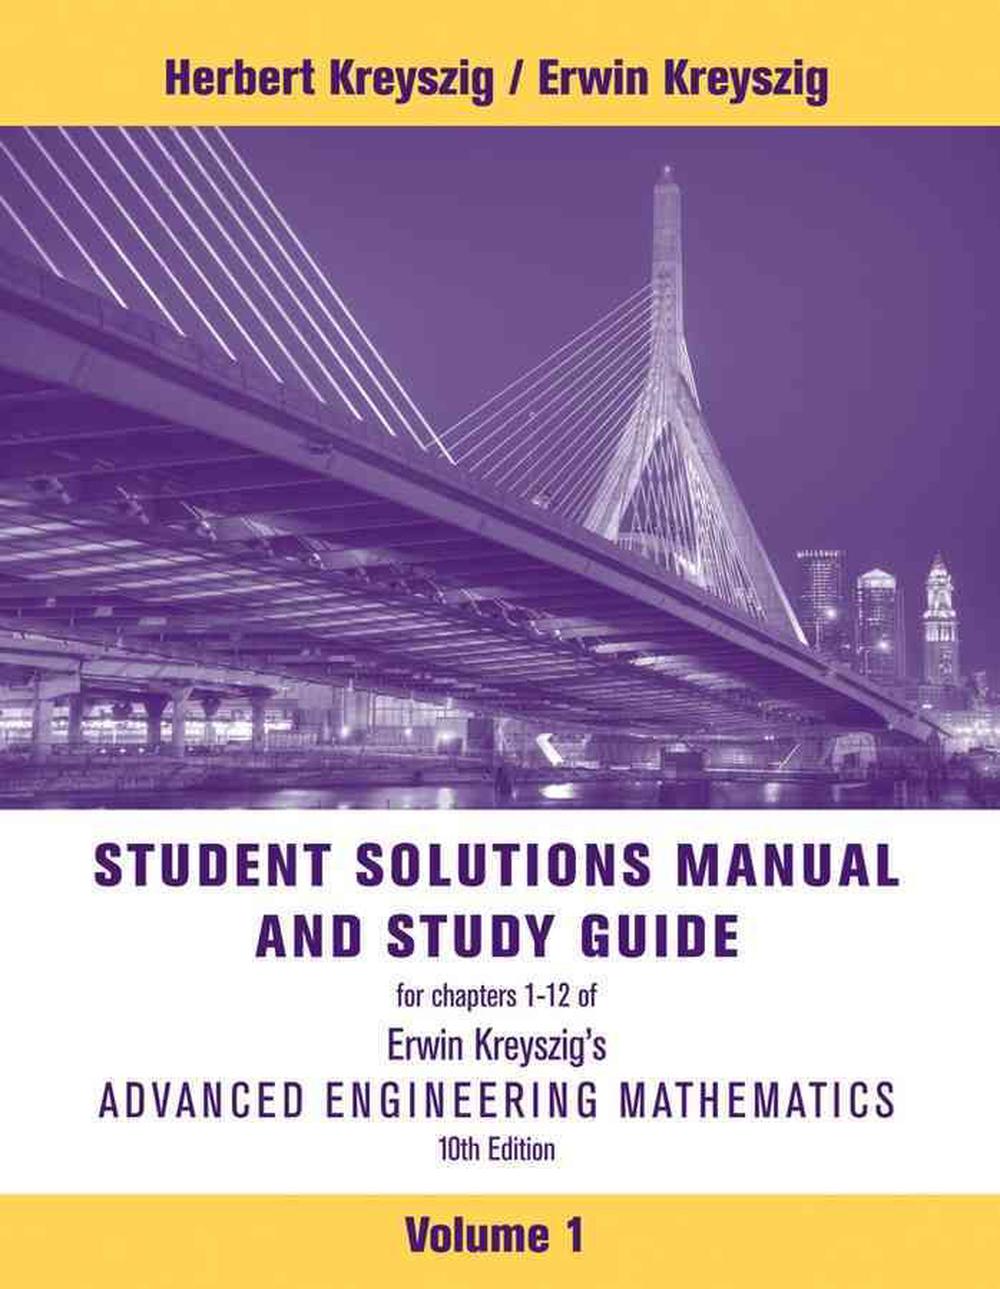 Advanced Engineering Mathematics, Student Solutions Manual by Erwin